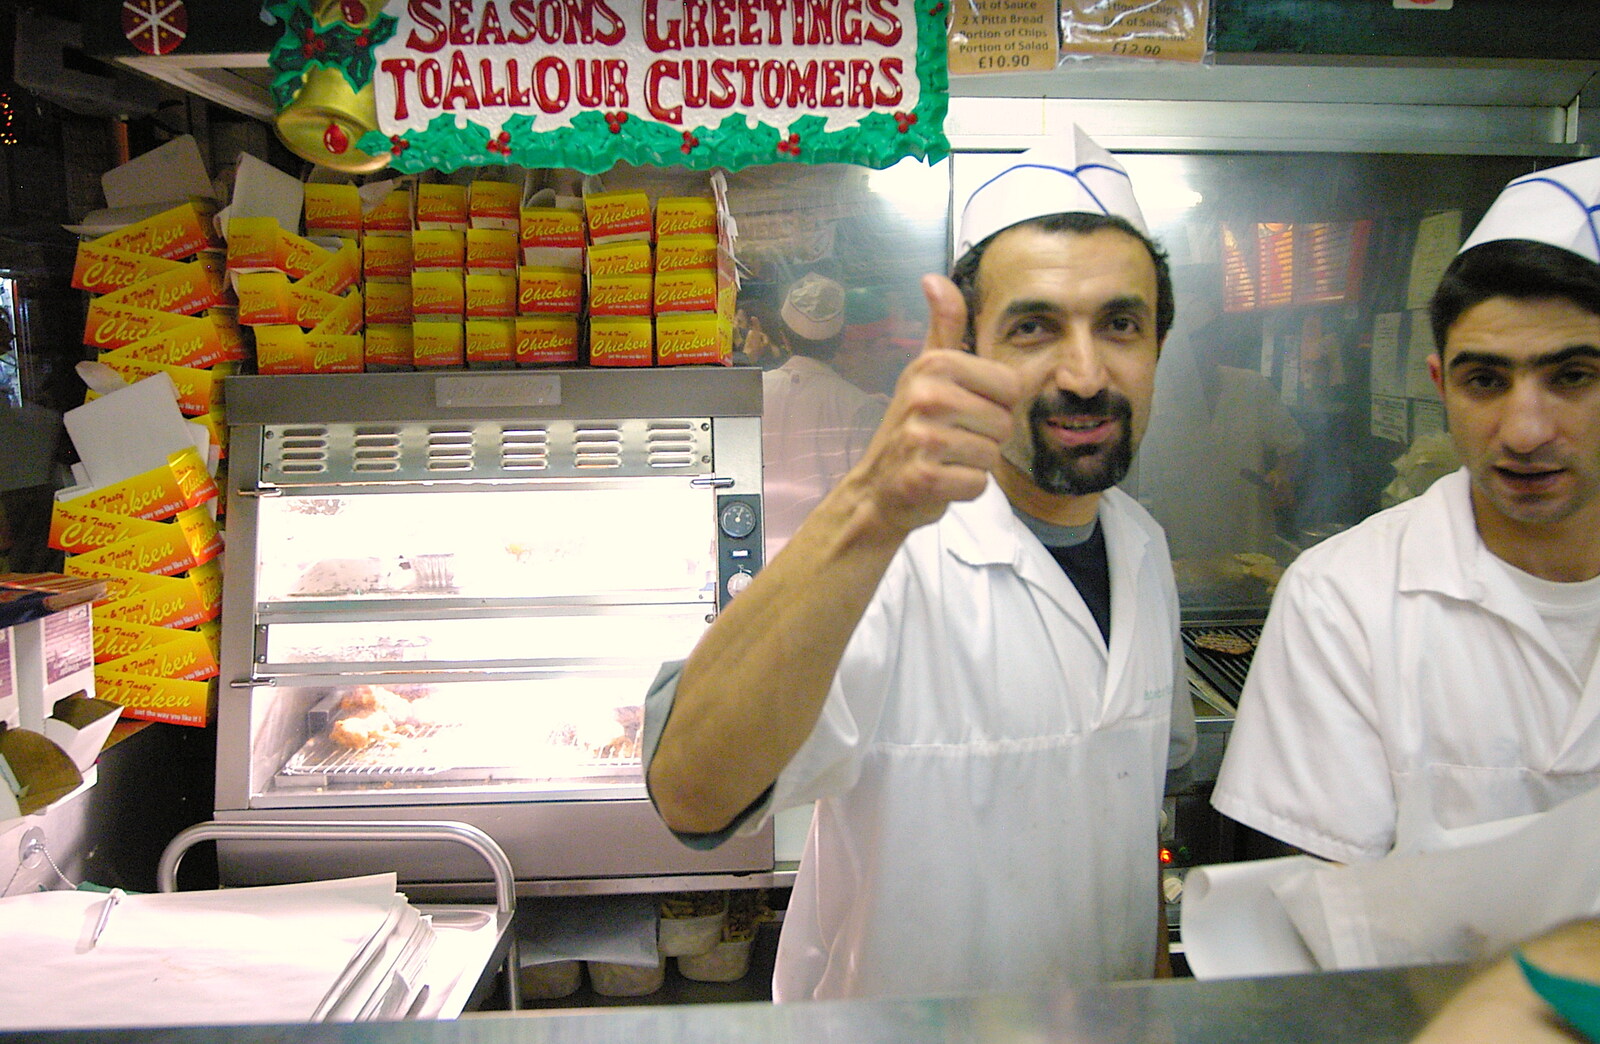 The crew of the kebab shop from Pre-Christmas Roundup: Wigs, Beers and Kebabs, Diss, Norfolk - 24th December 2005